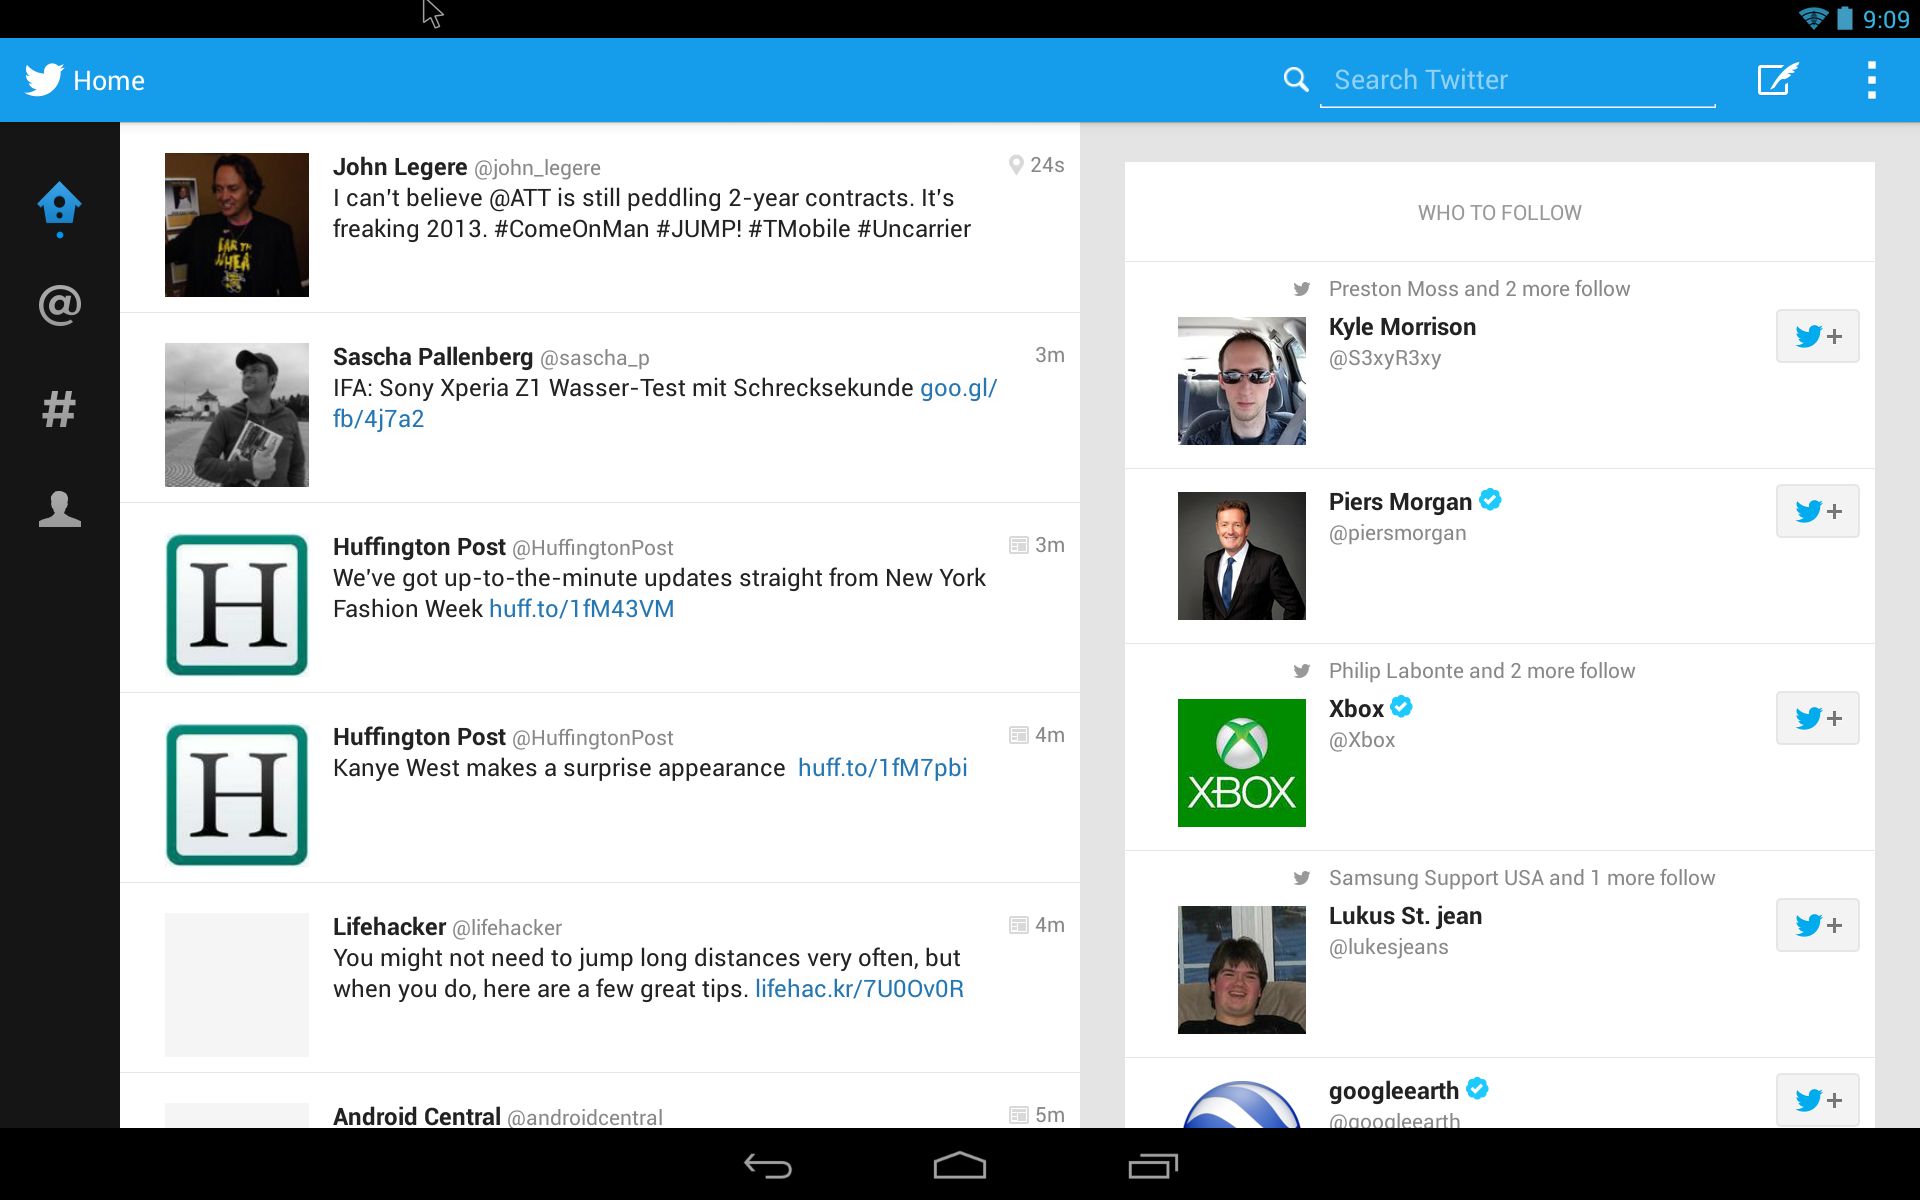 twitter download for android apk